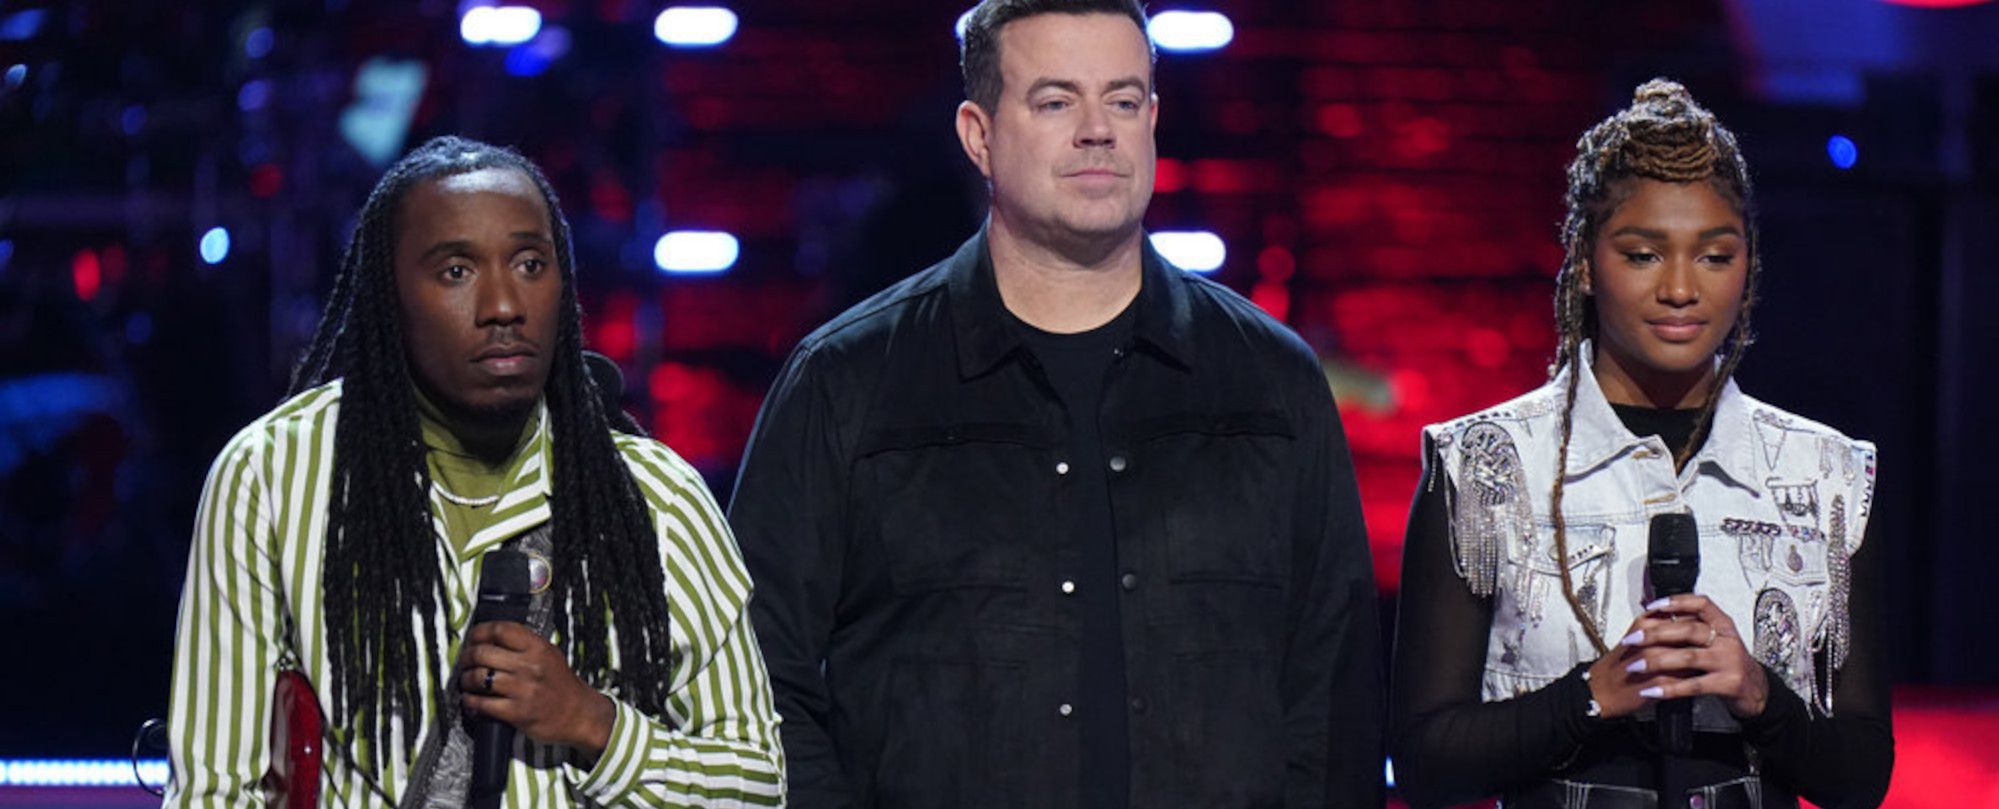 Jamar Langley and Mariah Kalia Battle It Out on ‘The Voice’ with John Mayer’s “Gravity”